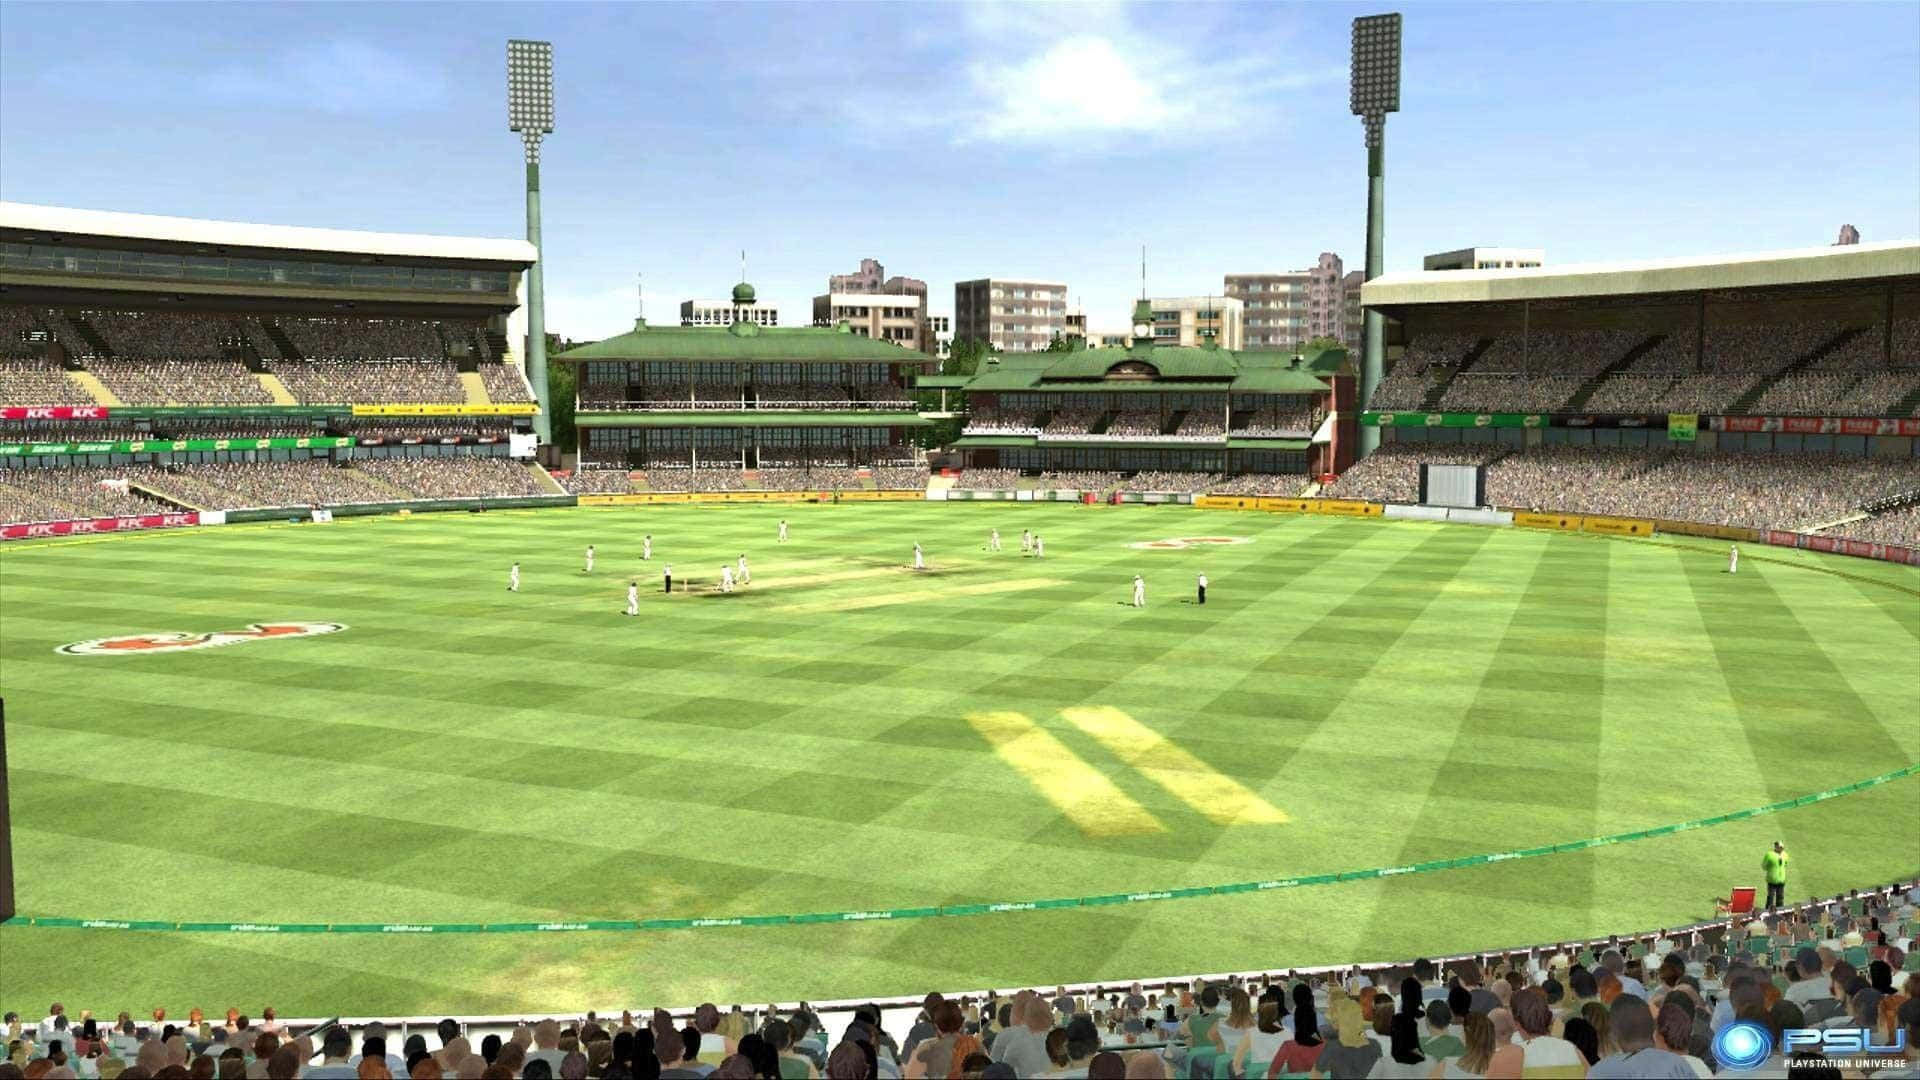 Captivating Cricket Ground Bathes in Soft Sunlight